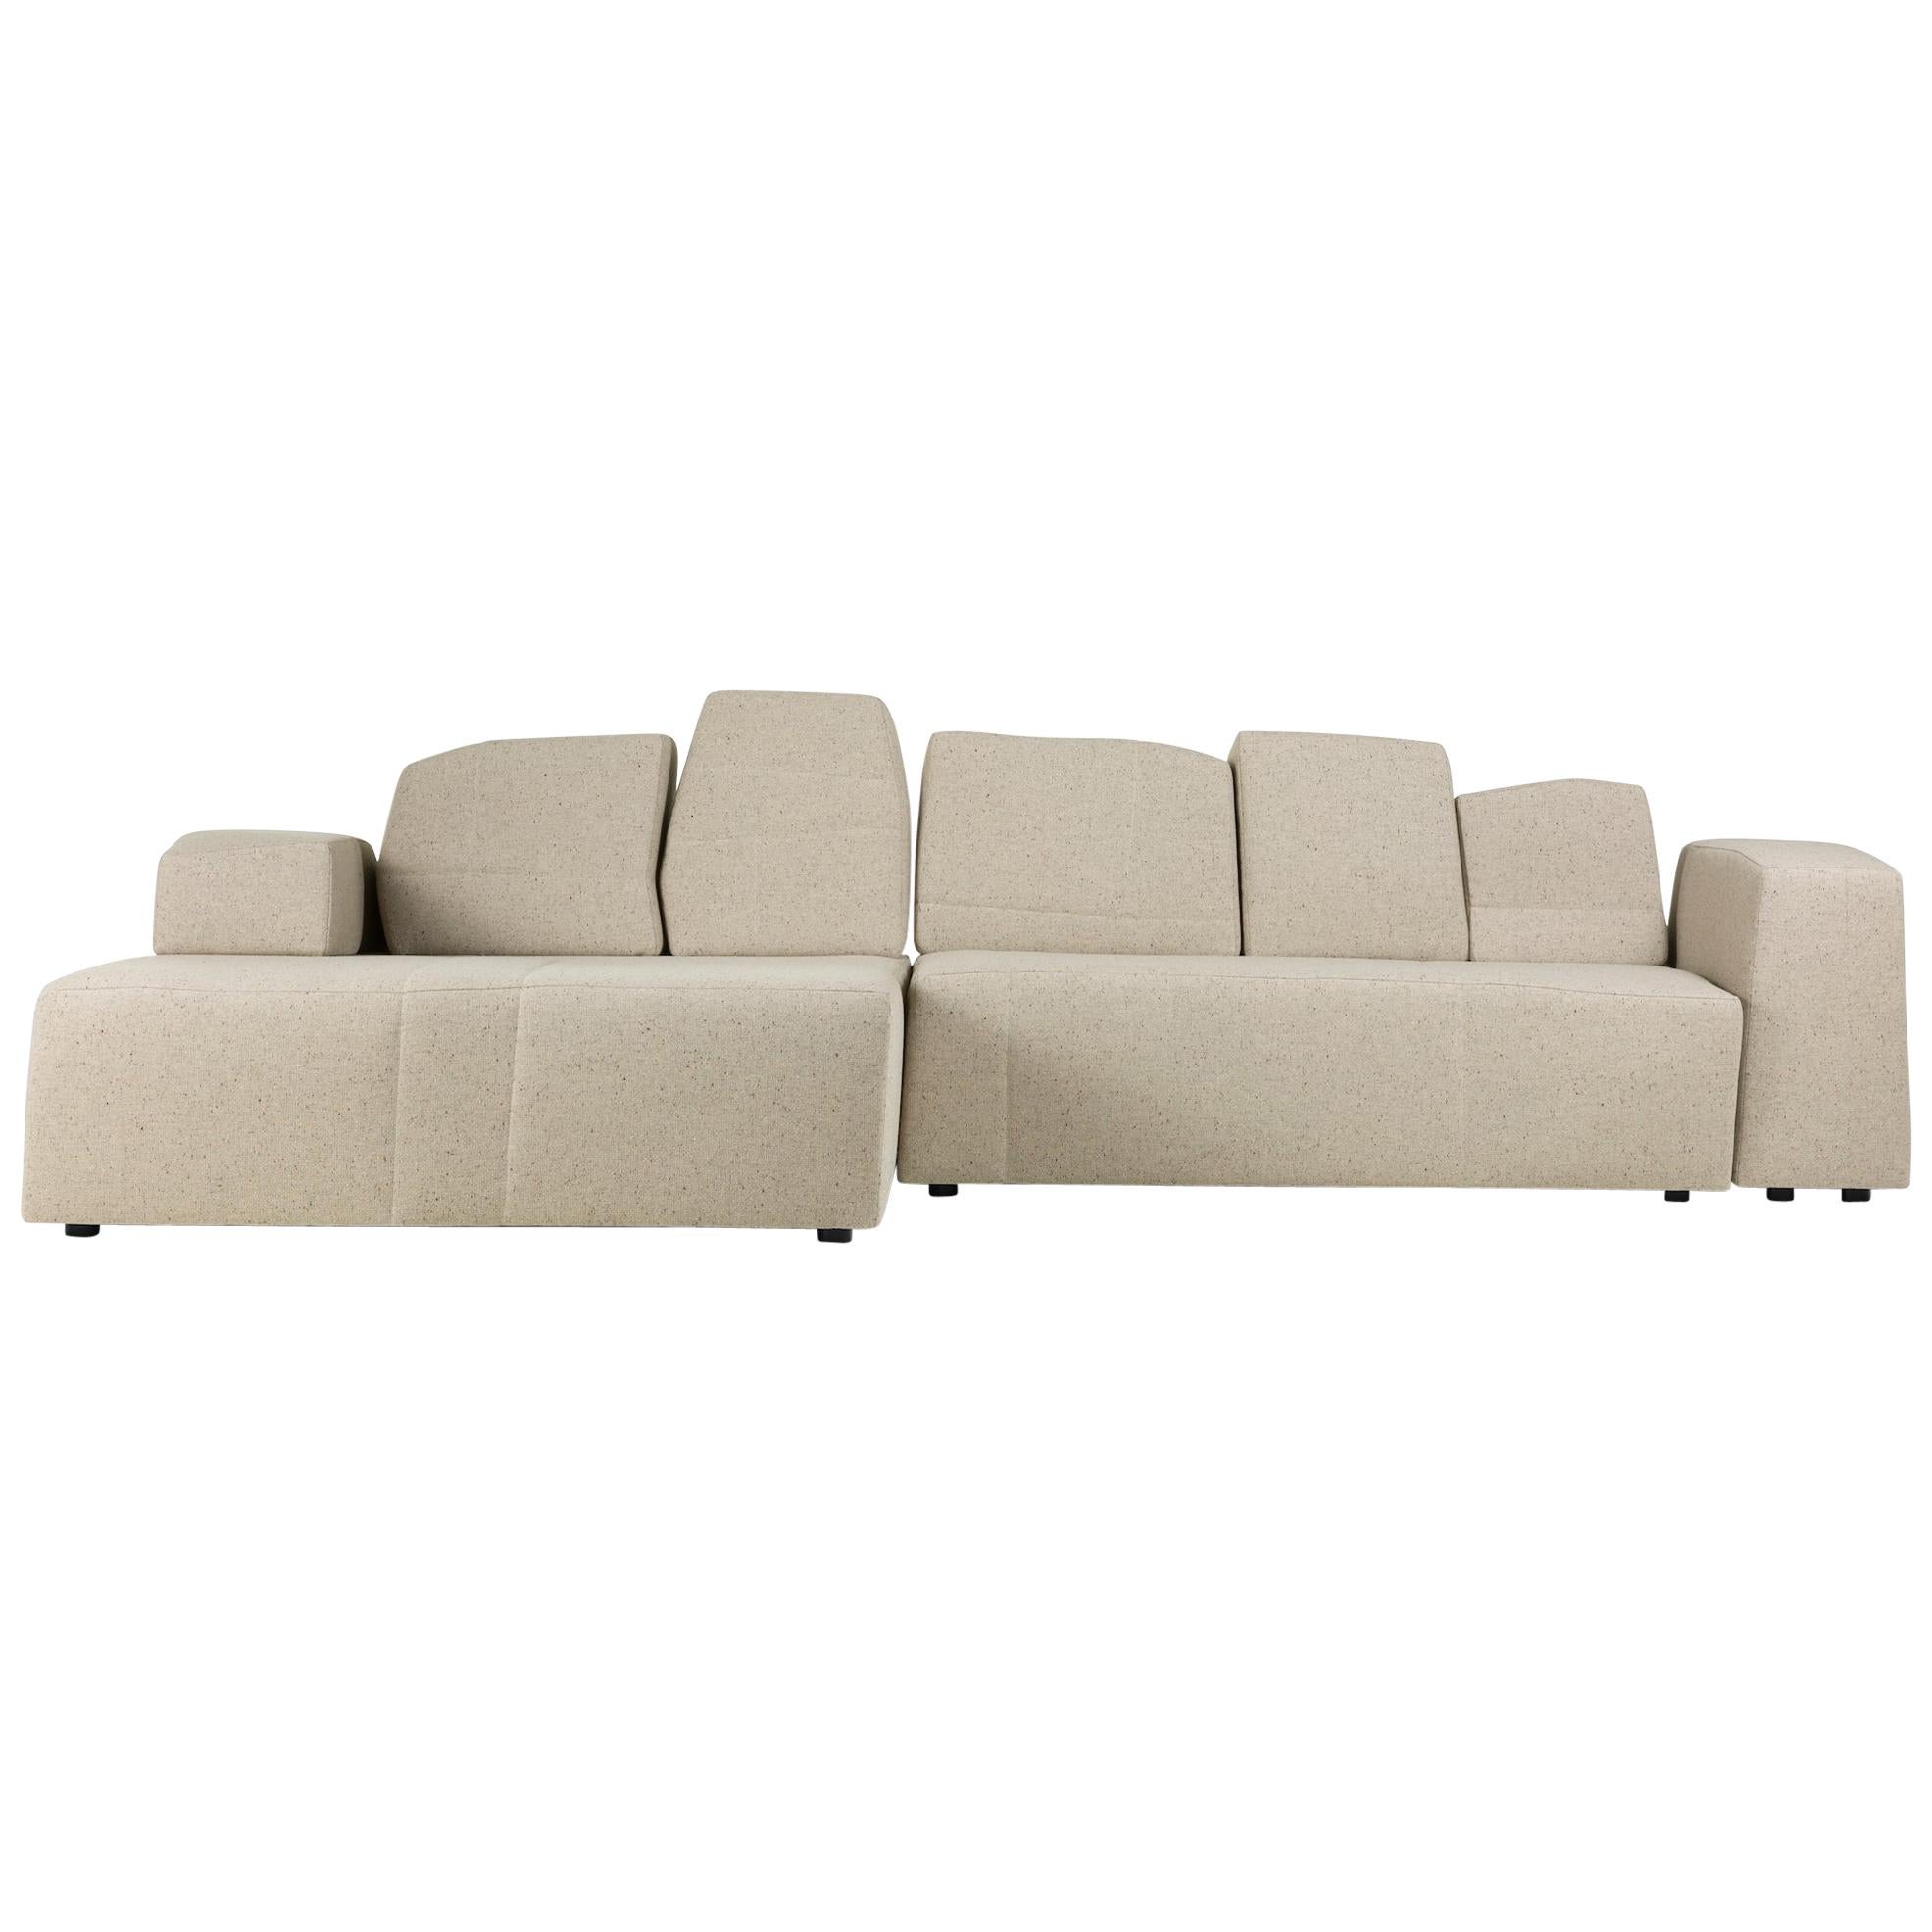 Something Like This Modular Sofa by Maarten Baas in Fabric or Leather For Sale